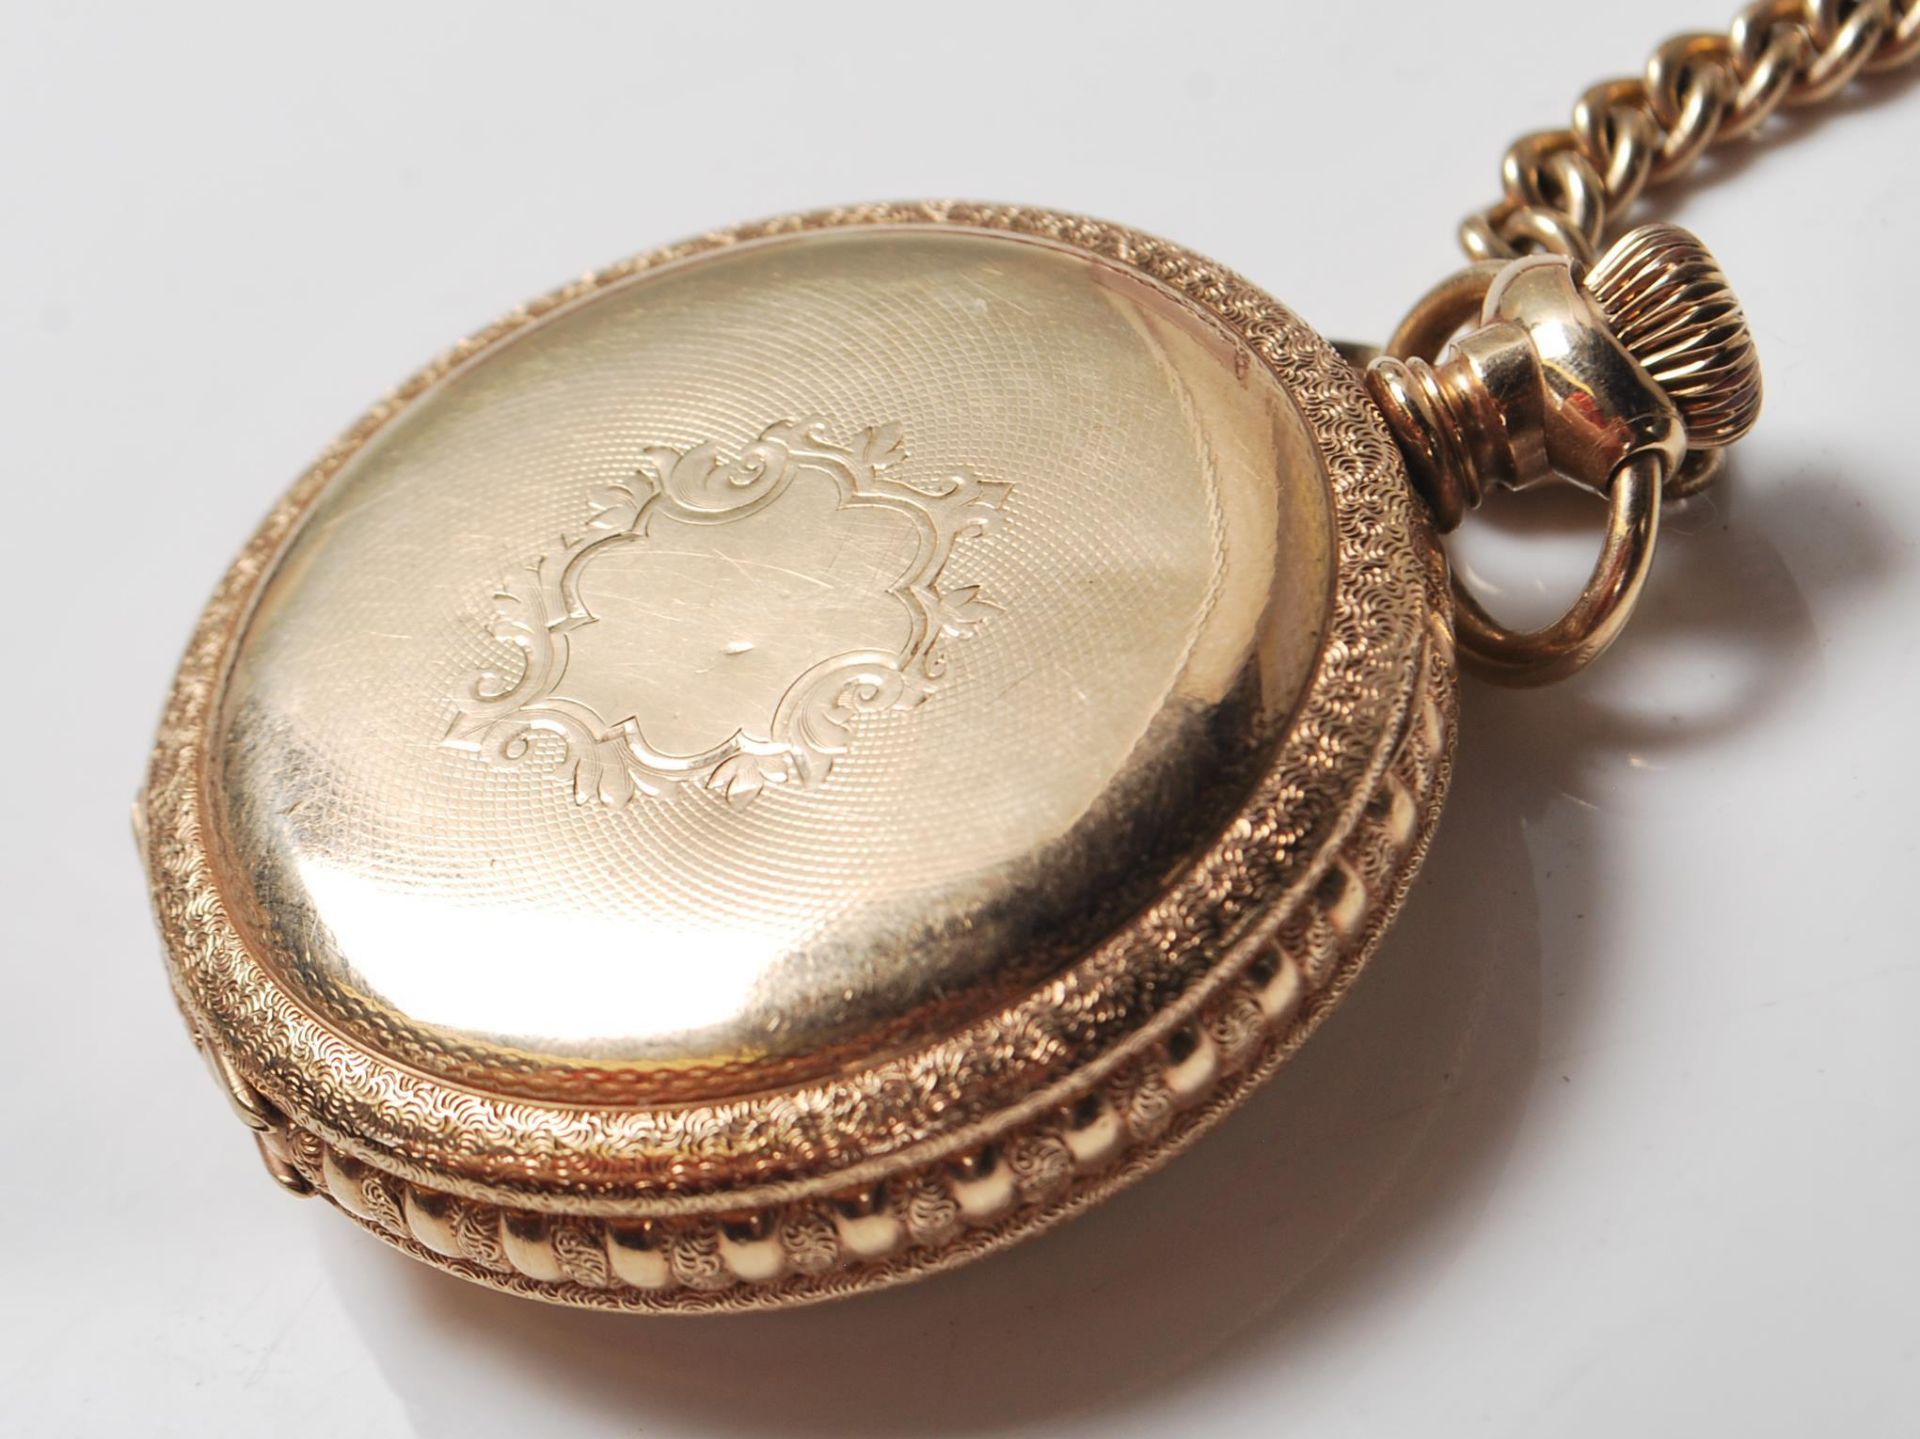 ANTIQUE WALTHAM USA POCKET WATCH WITH WWI FIRST WORLD WAR MEDAL - Image 3 of 8